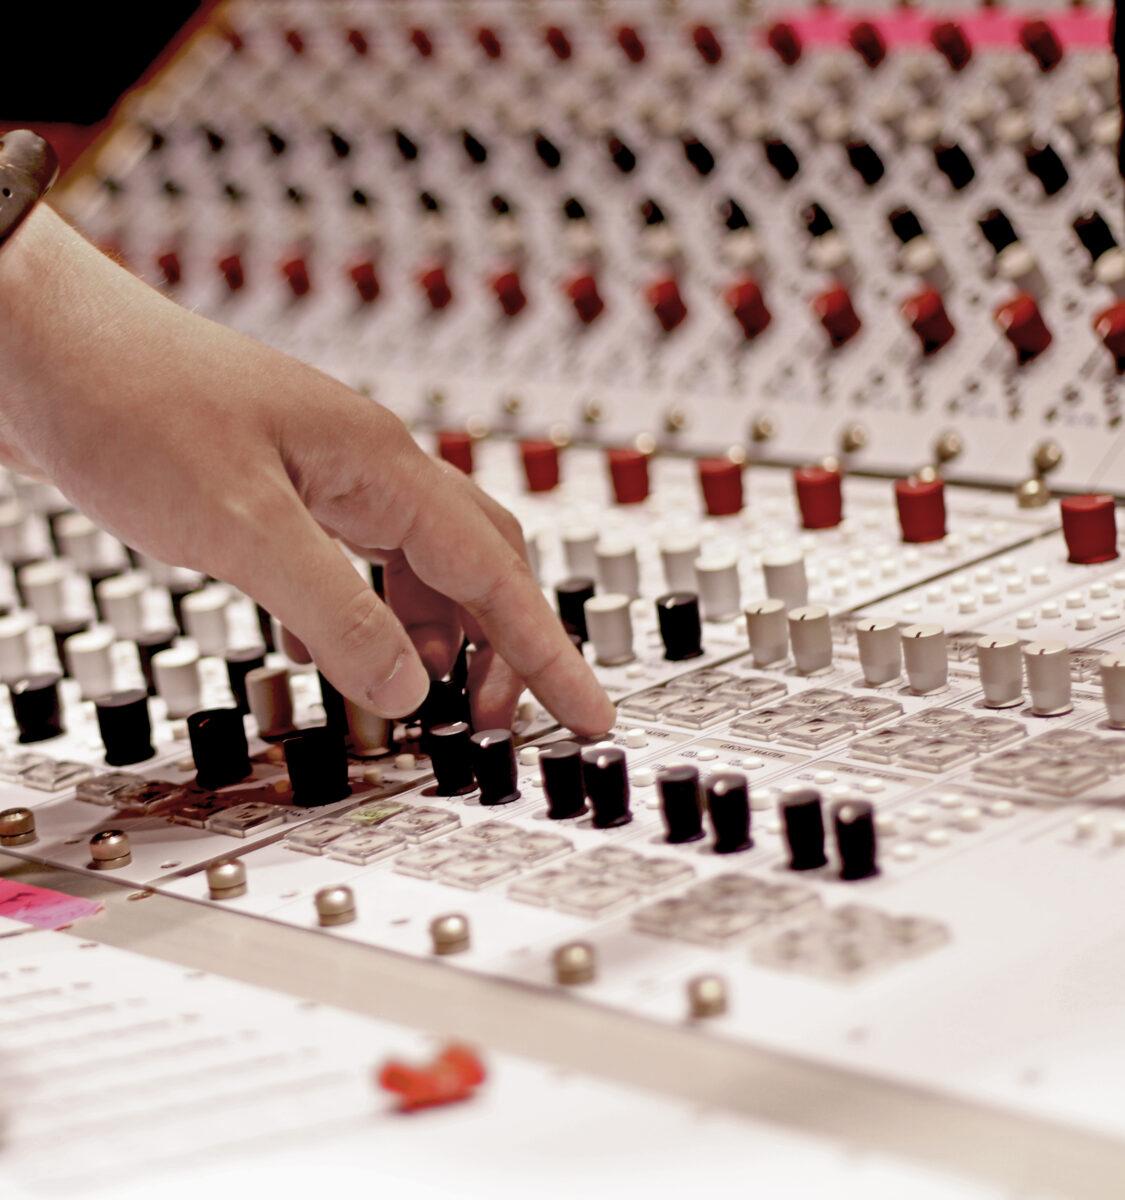 How long does mixing and mastering take-photo 7